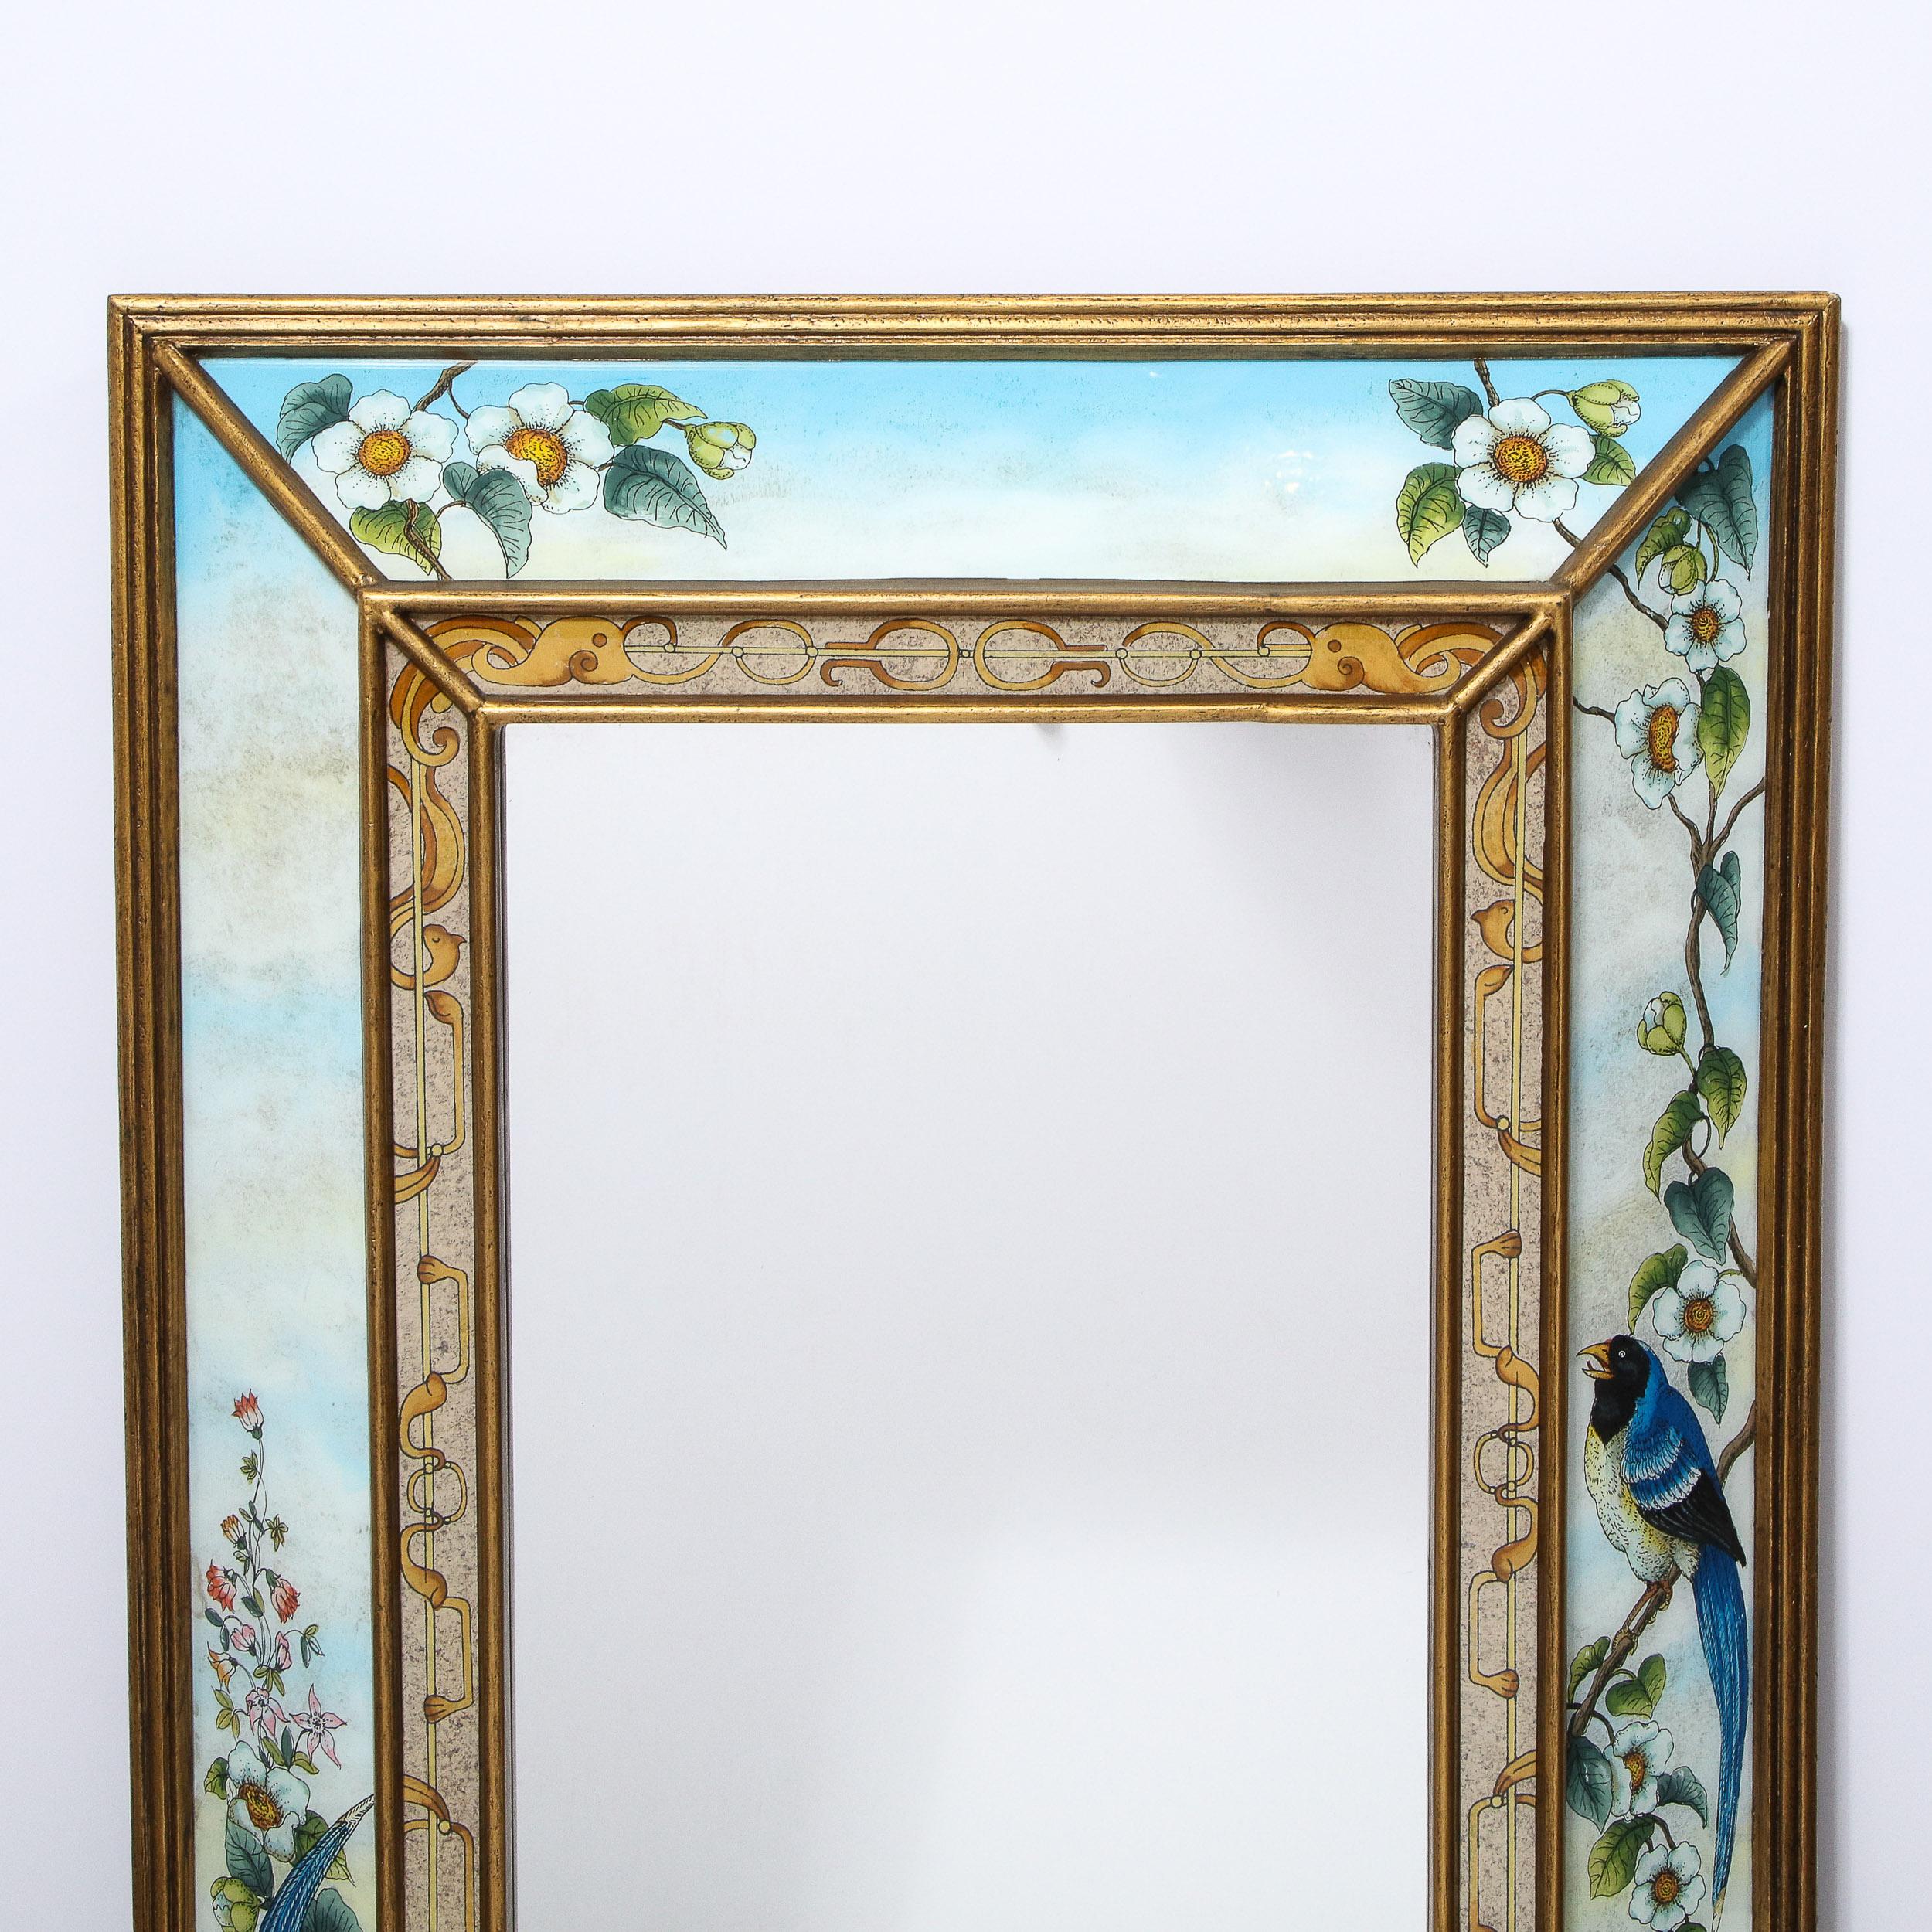 This whimsical and sophisticated Mid-Century Modern mirror was realized in the United States circa 1950. It features a giltwood border with reverse eglomise painted panels depicting a variety of stylized flora and fauna- including apple blossoms and